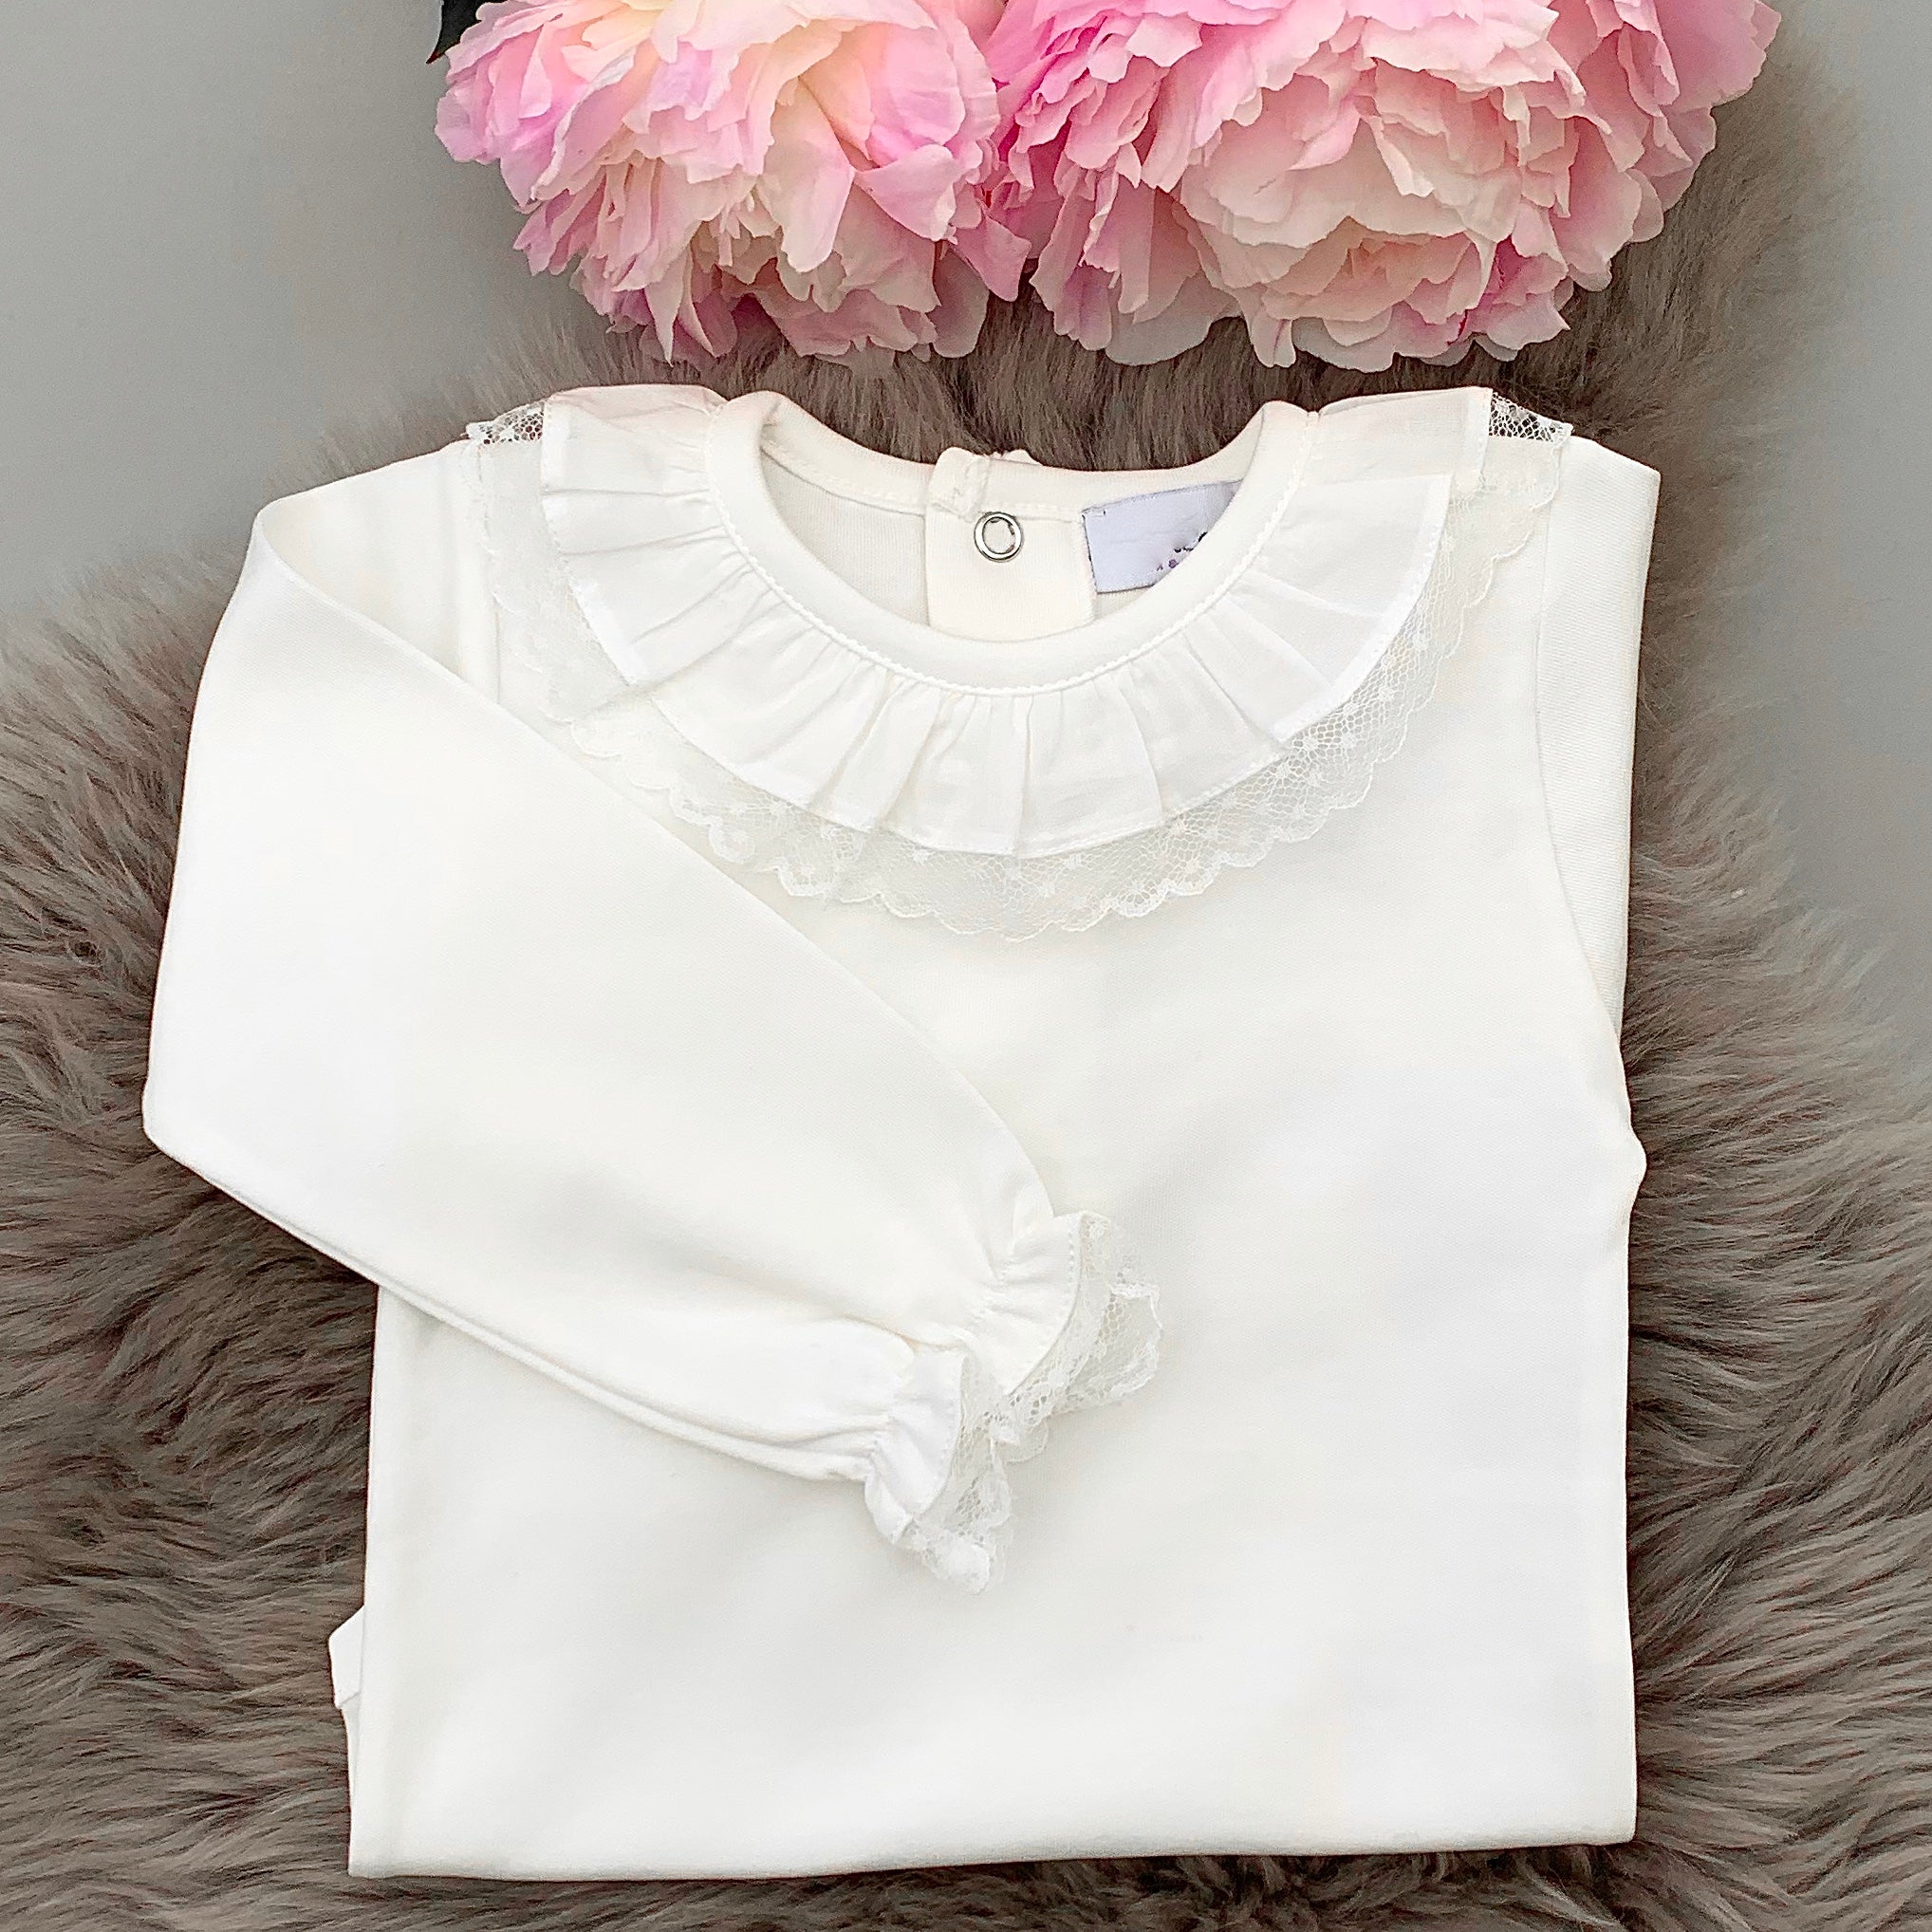 portuguese frill collar bodysuit with lace edges and love sleeves